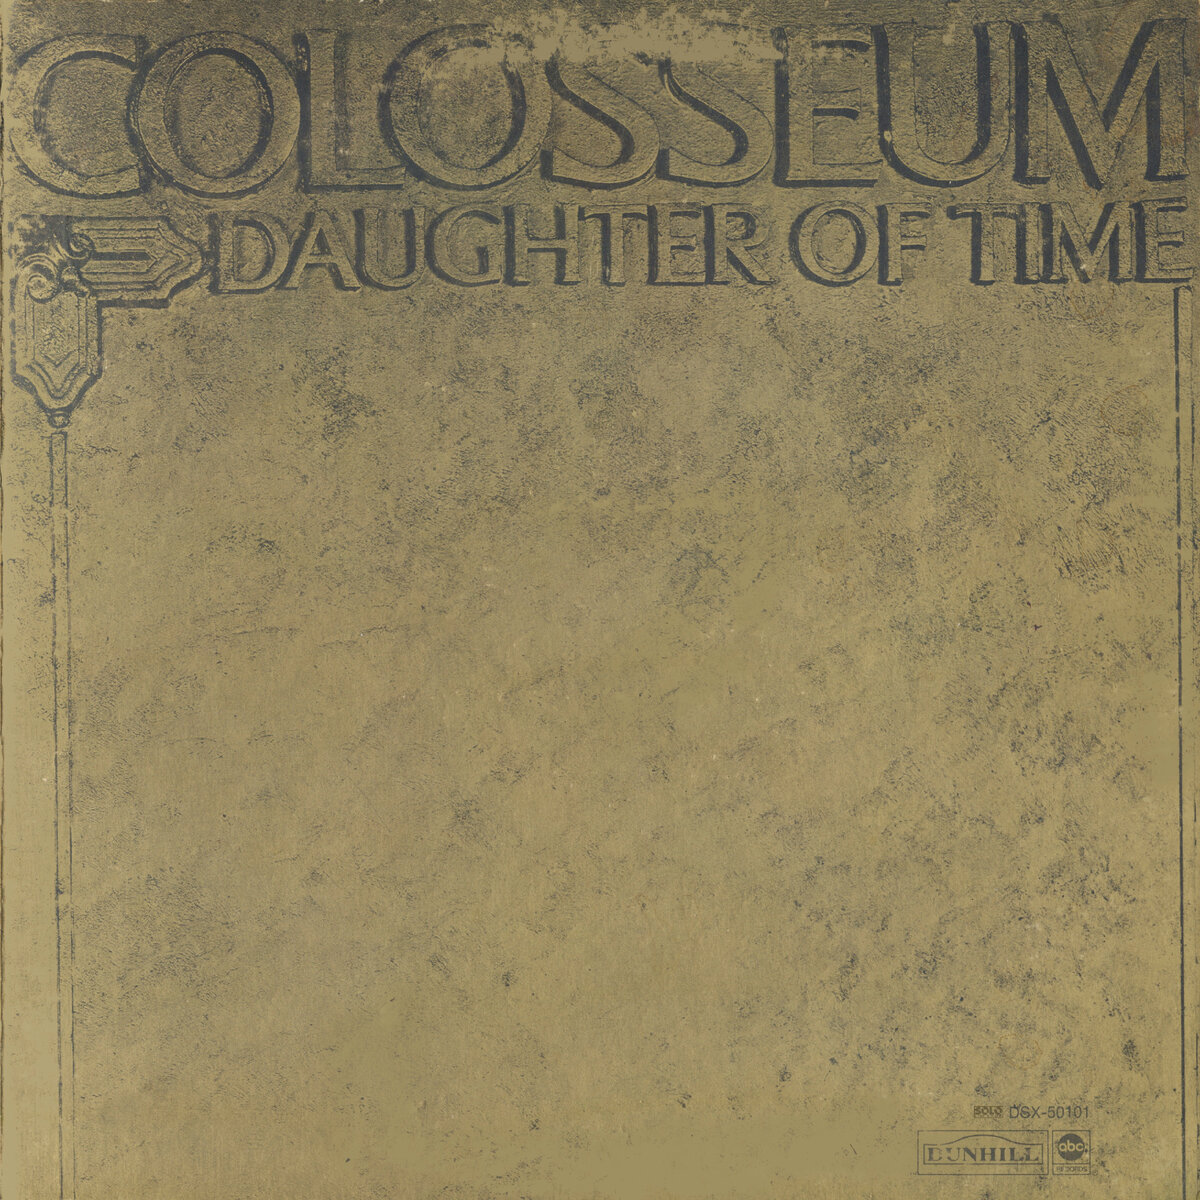 Daughter of time. ‎ Daughter of time 1970. Colosseum daughter of time Belle - 223766 shm Japan Mini LP CD.